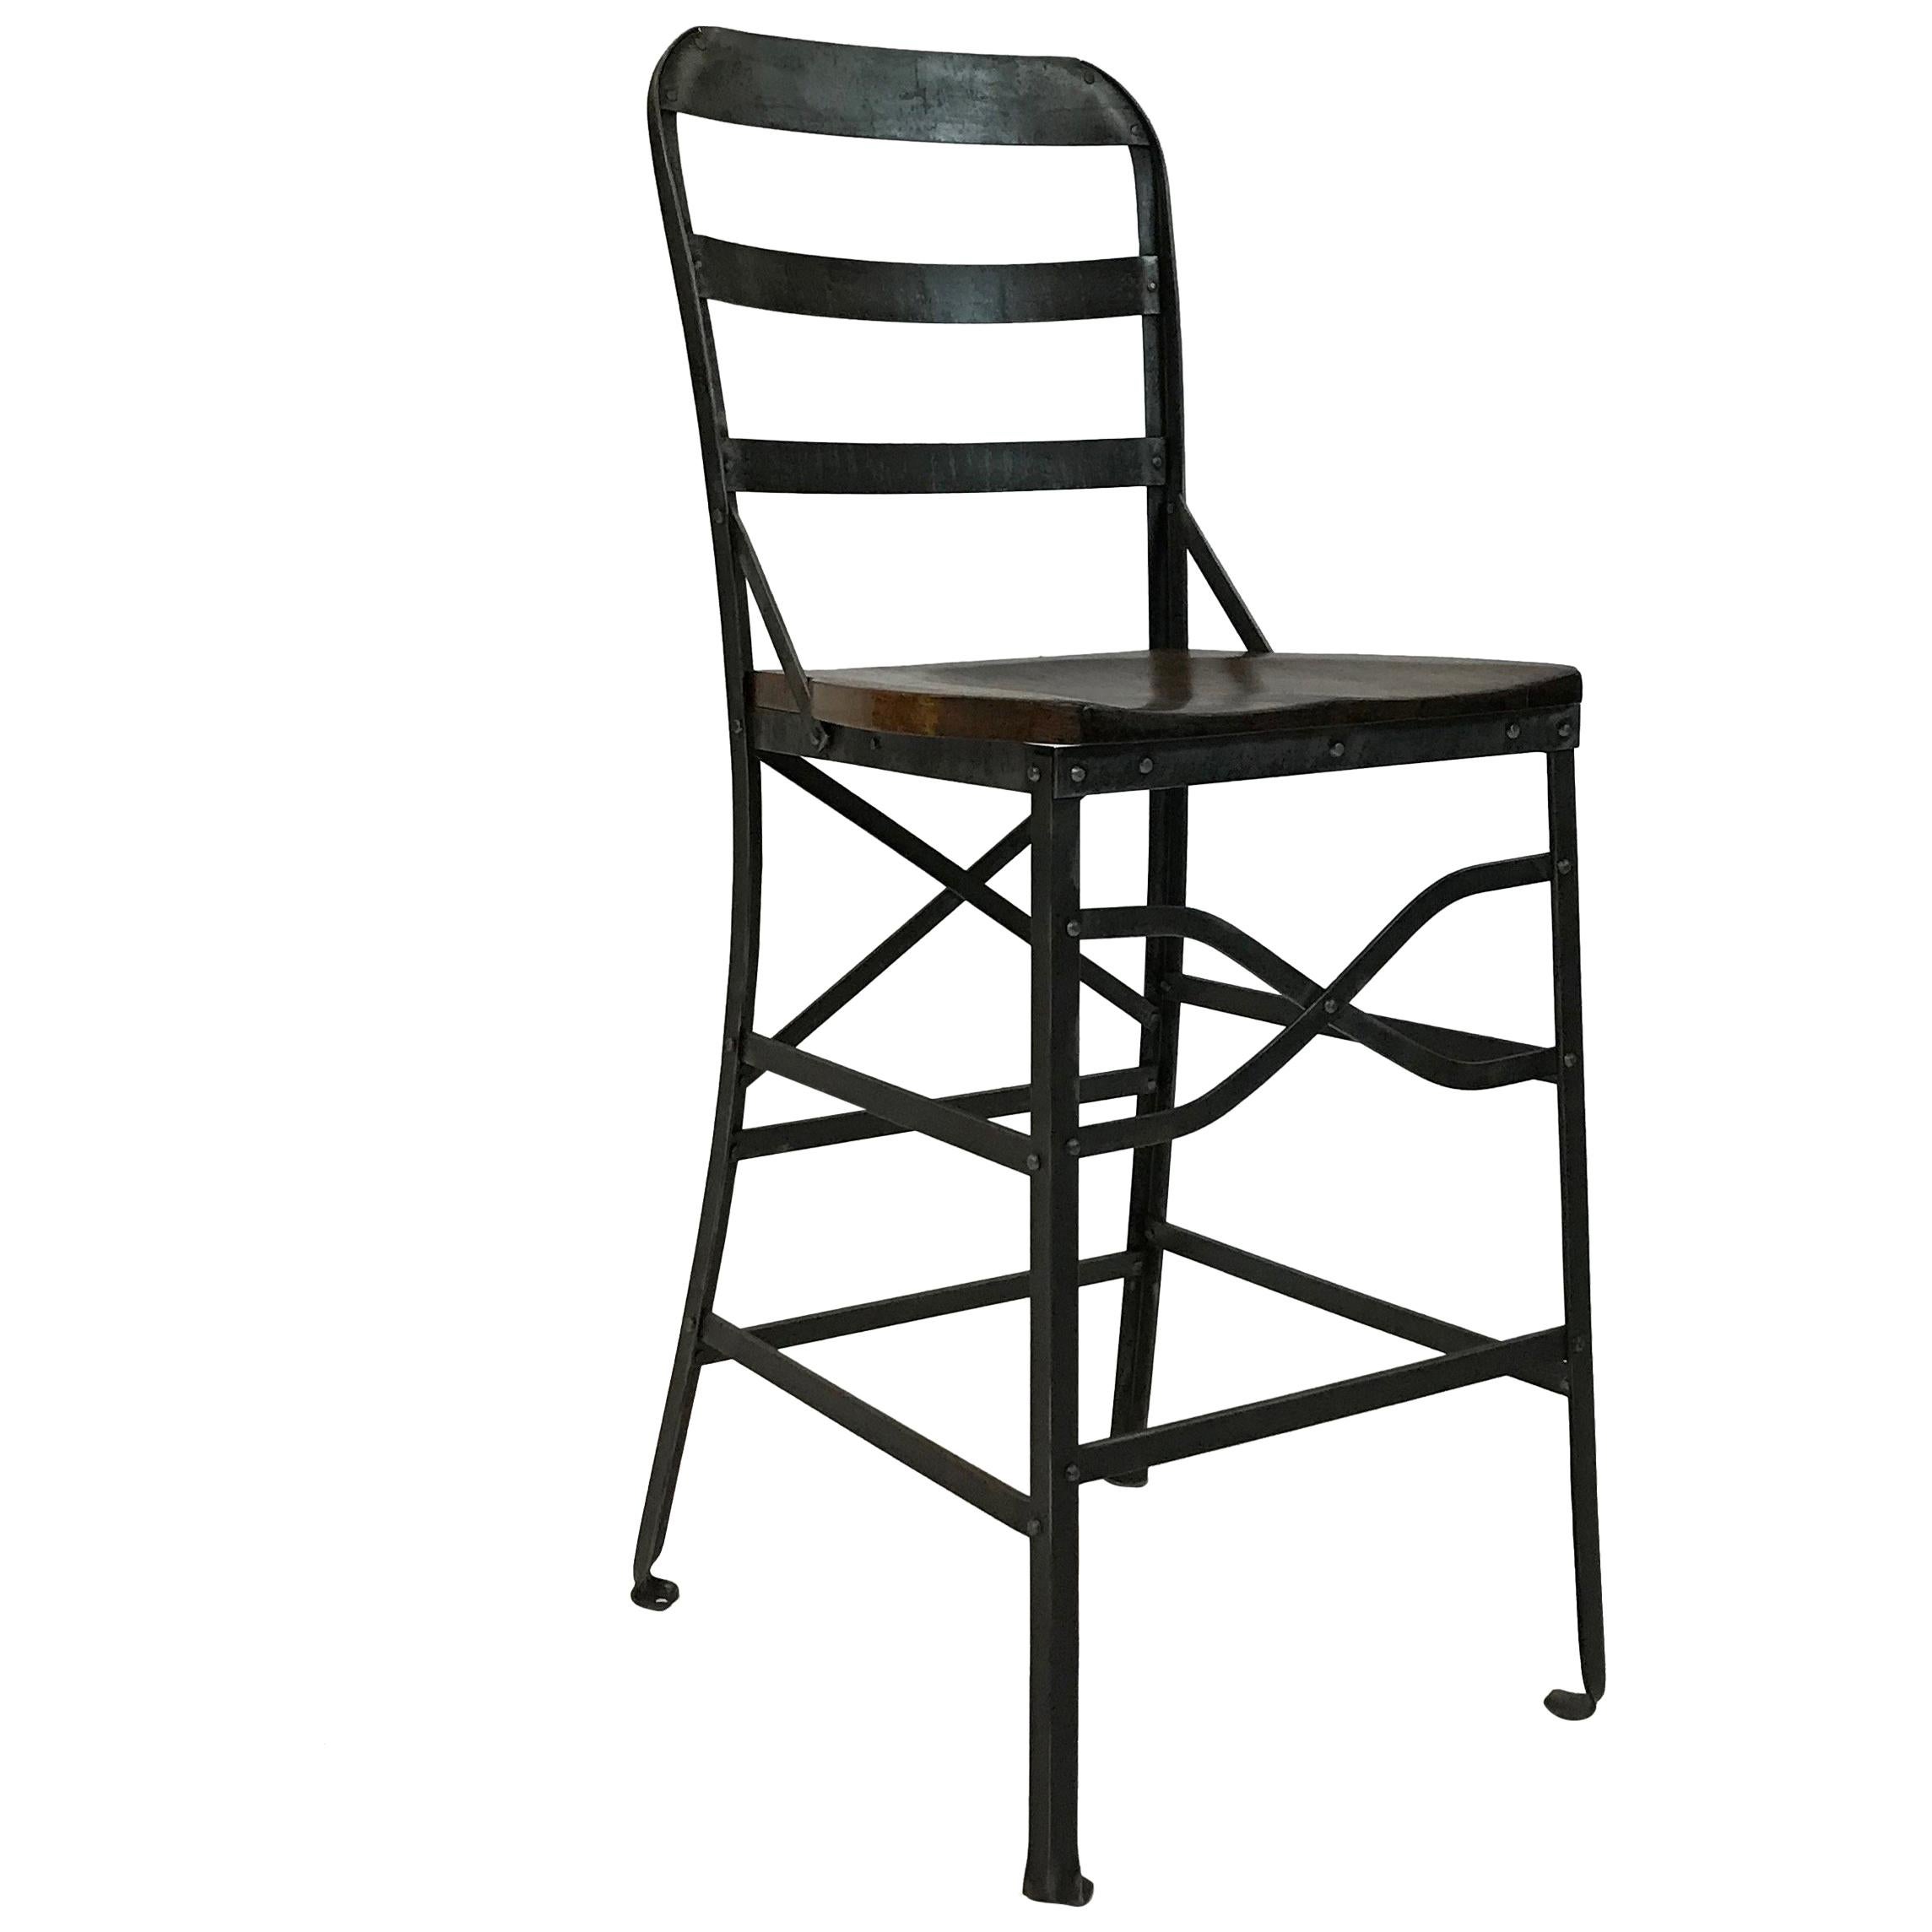 Industrial Counter Height Toledo Shop Stool For Sale At 1stdibs